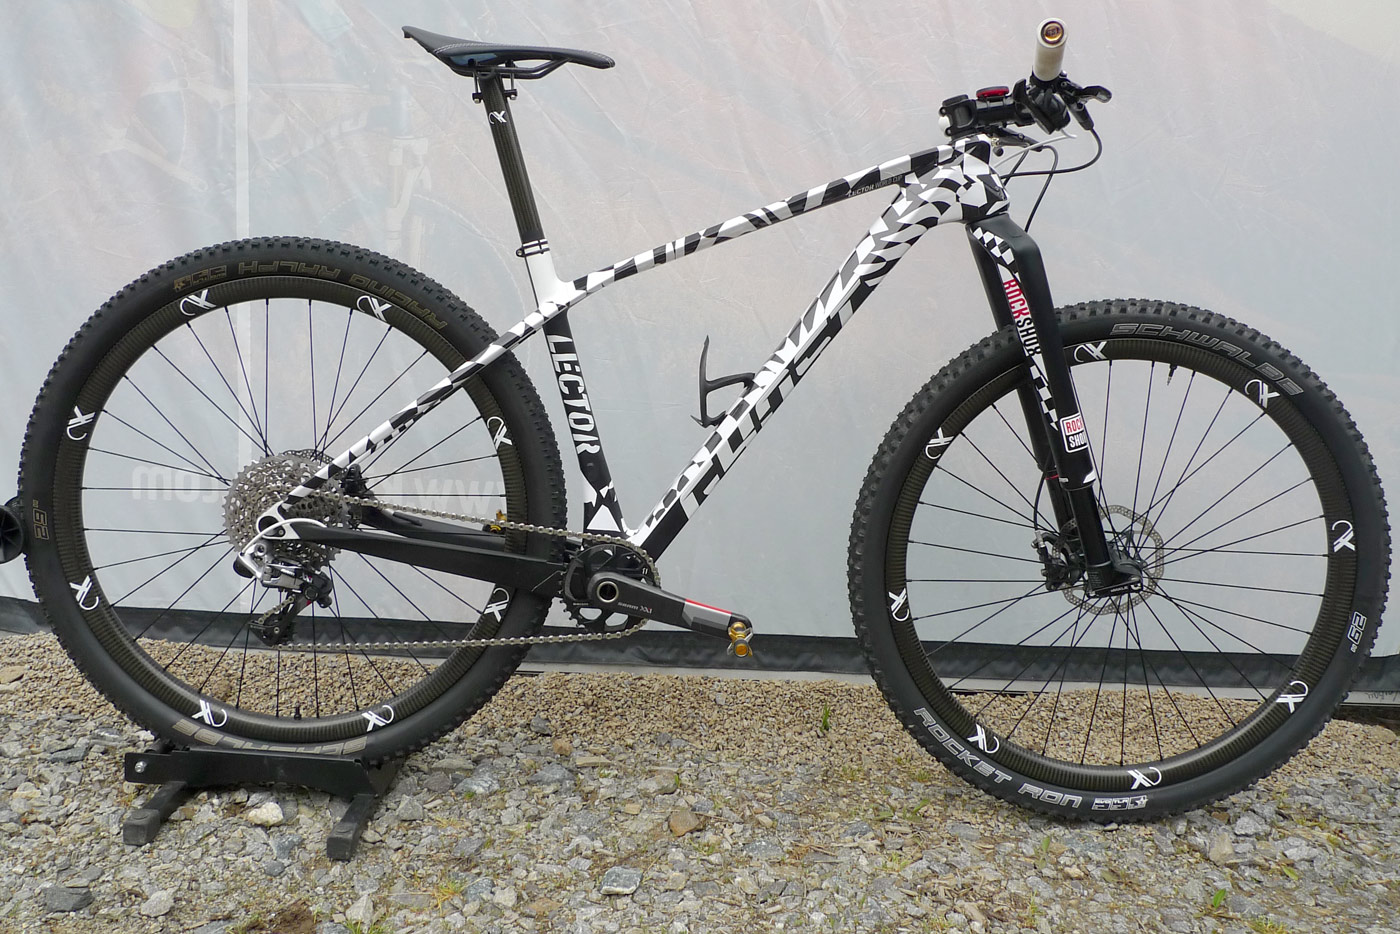 Spy Shots: New Ghost Lector World Cup Carbon Hardtail – Nove Mesto XC, Pro Bike Check